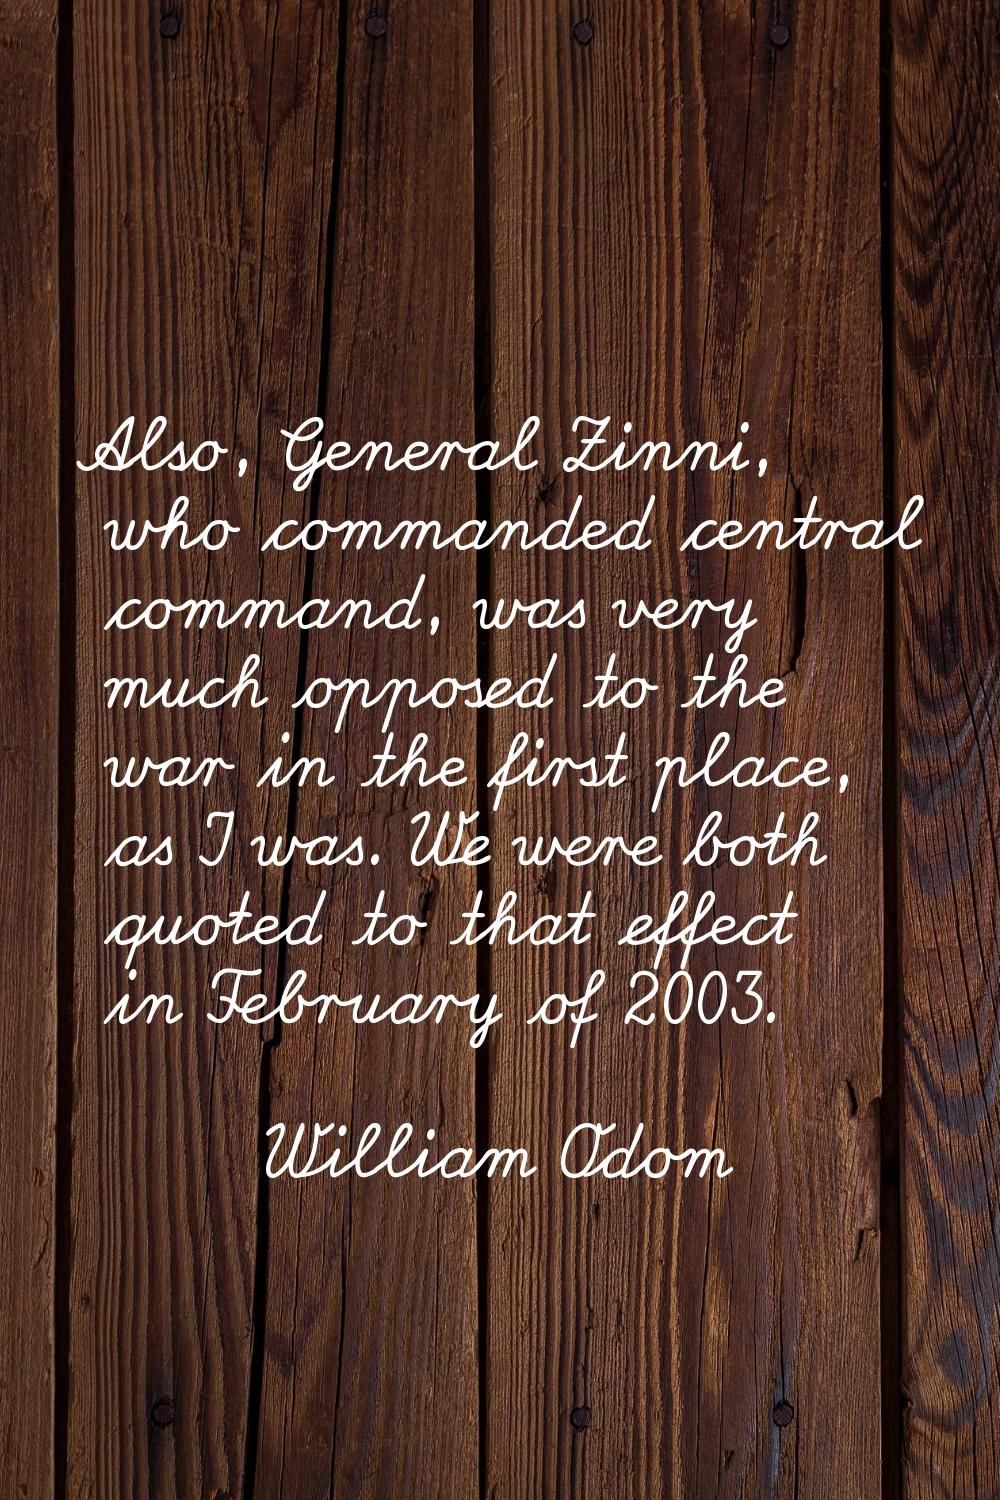 Also, General Zinni, who commanded central command, was very much opposed to the war in the first p